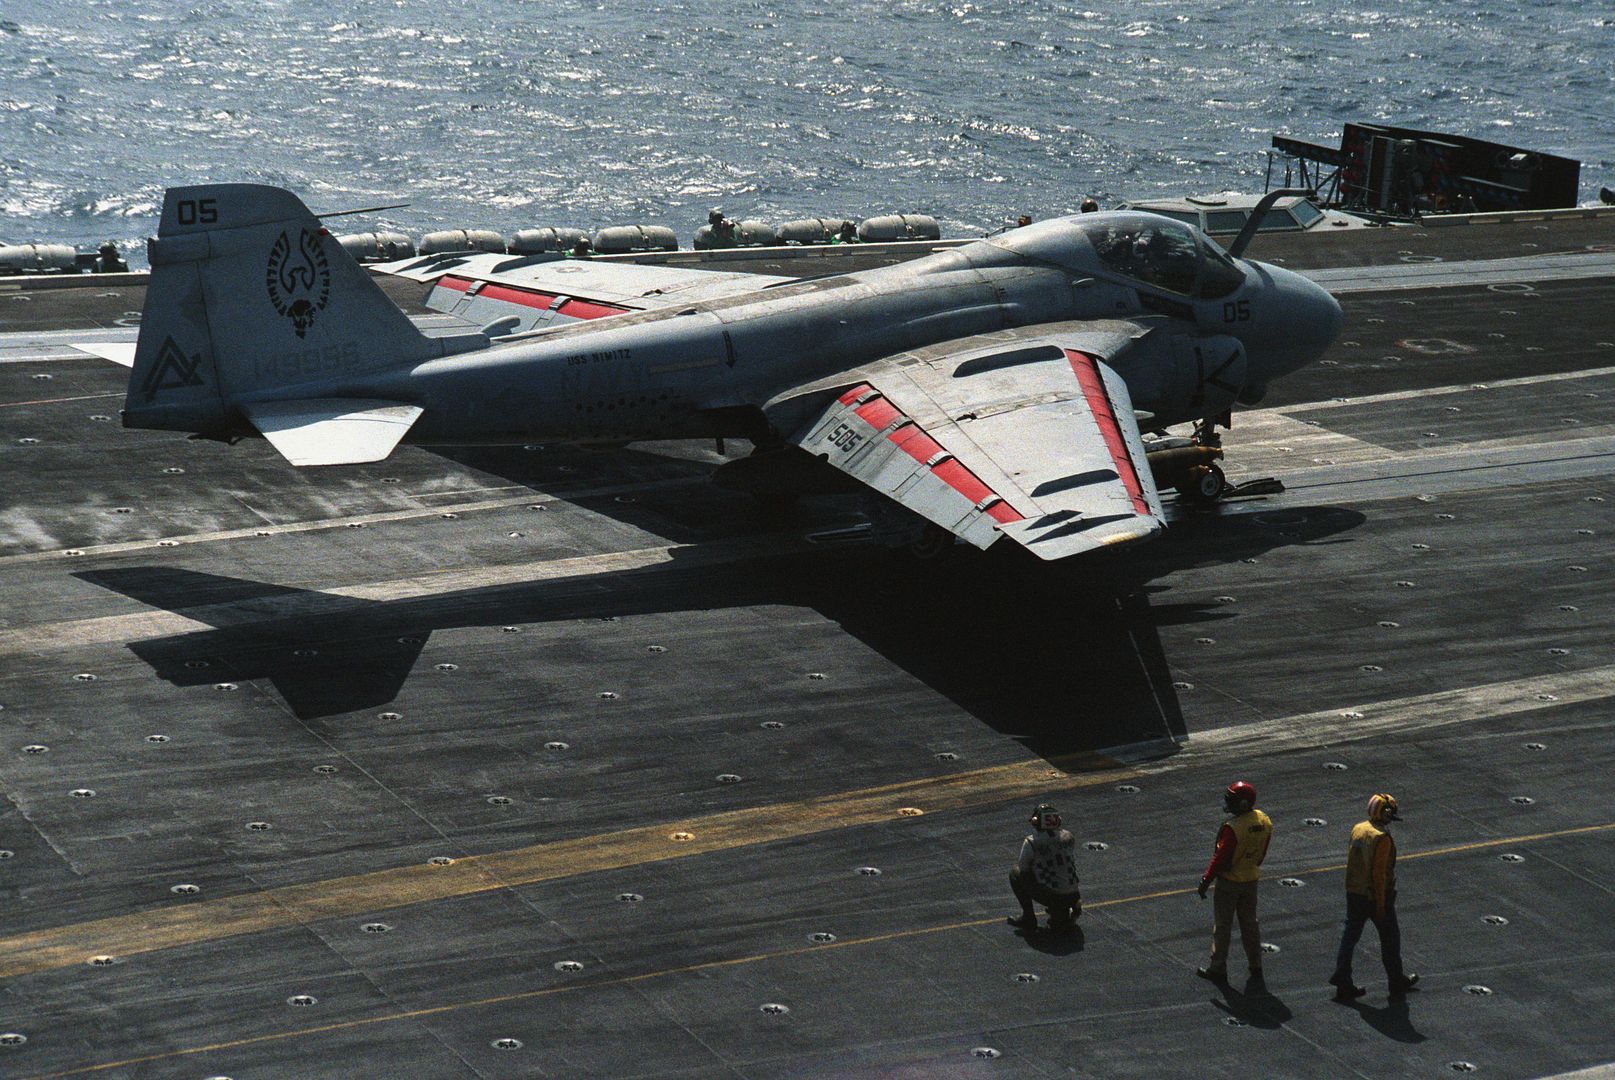 A 6E Intruder From Attack Squadron 304 Firebirds NAS Alameda California In Position On Catapult Two Ready To Launch Off The Deck Of The USN Nimitz Class Aircraft Carrier USS NIMITZ